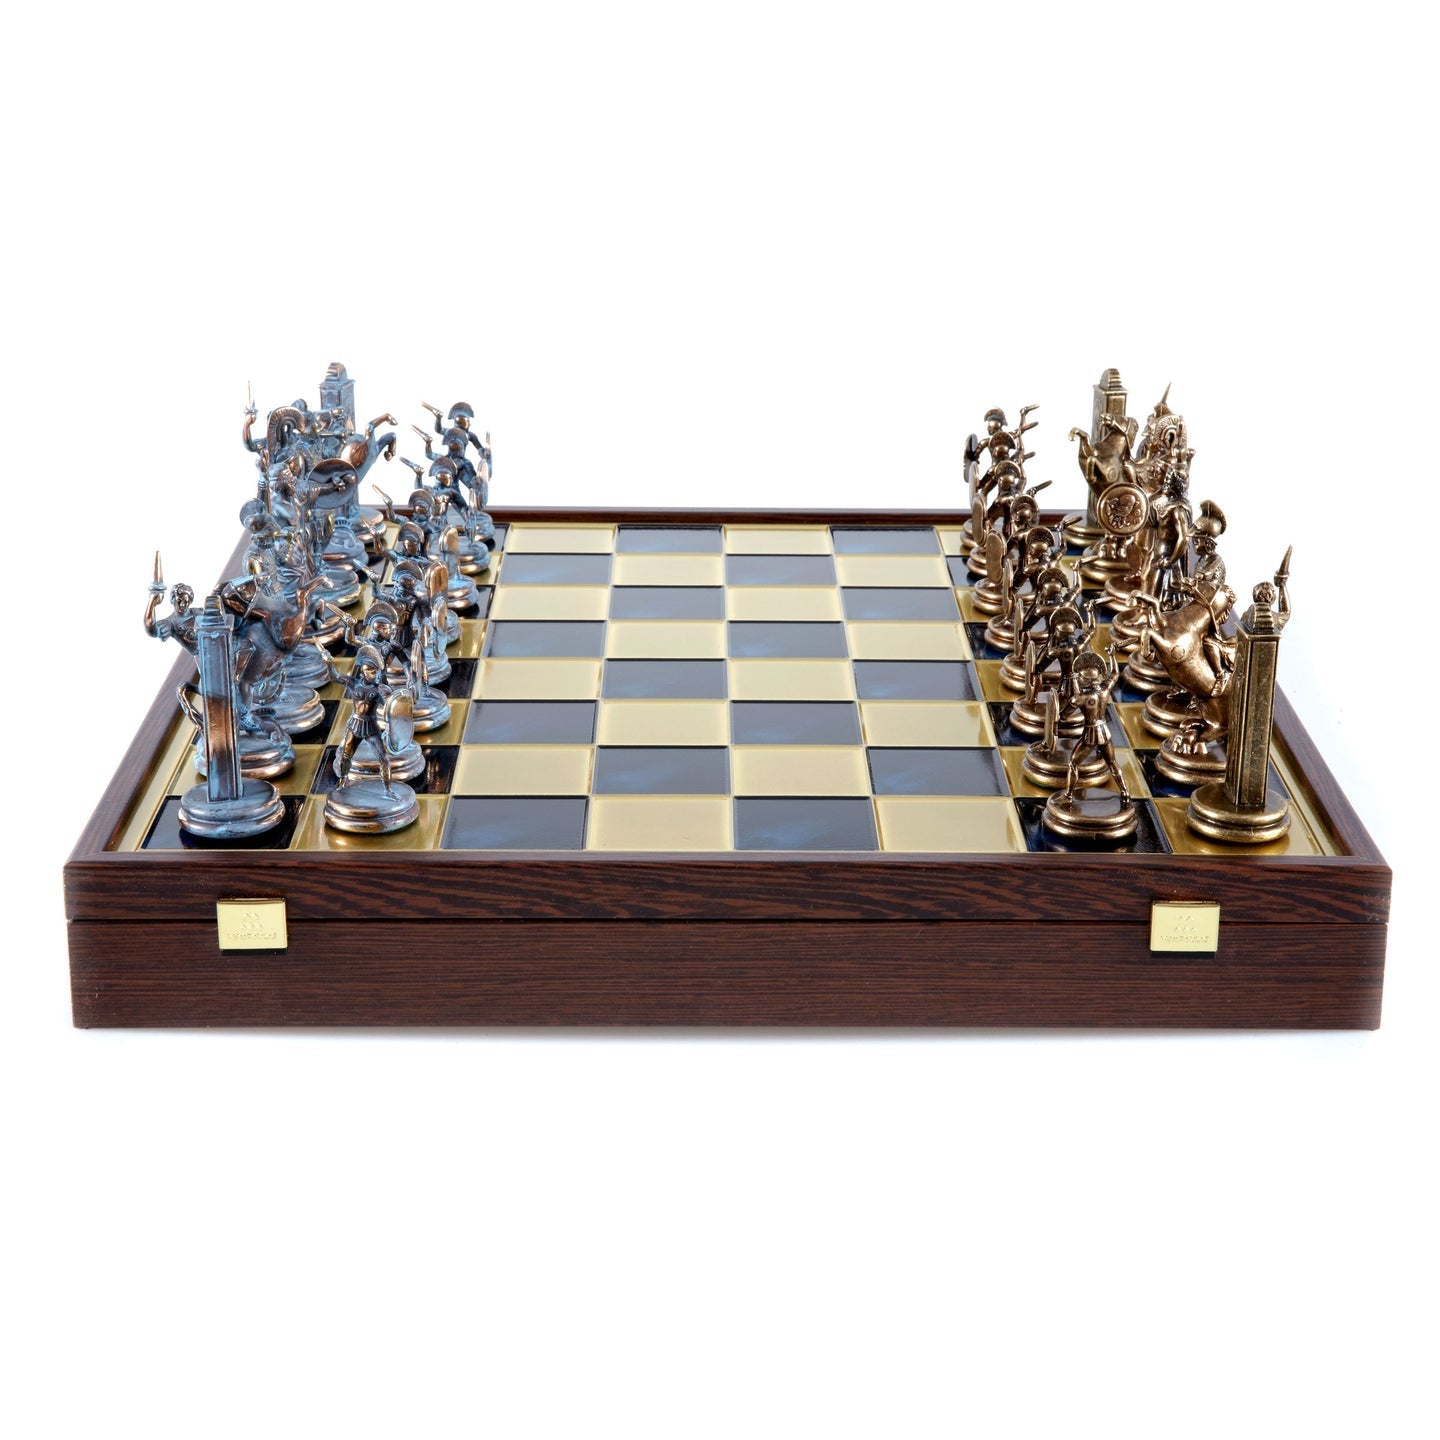 GREEK MYTHOLOGY CHESS SET in wooden box with blue/brown chessmen and bronze chessboard (Extra Large) - LAZADO